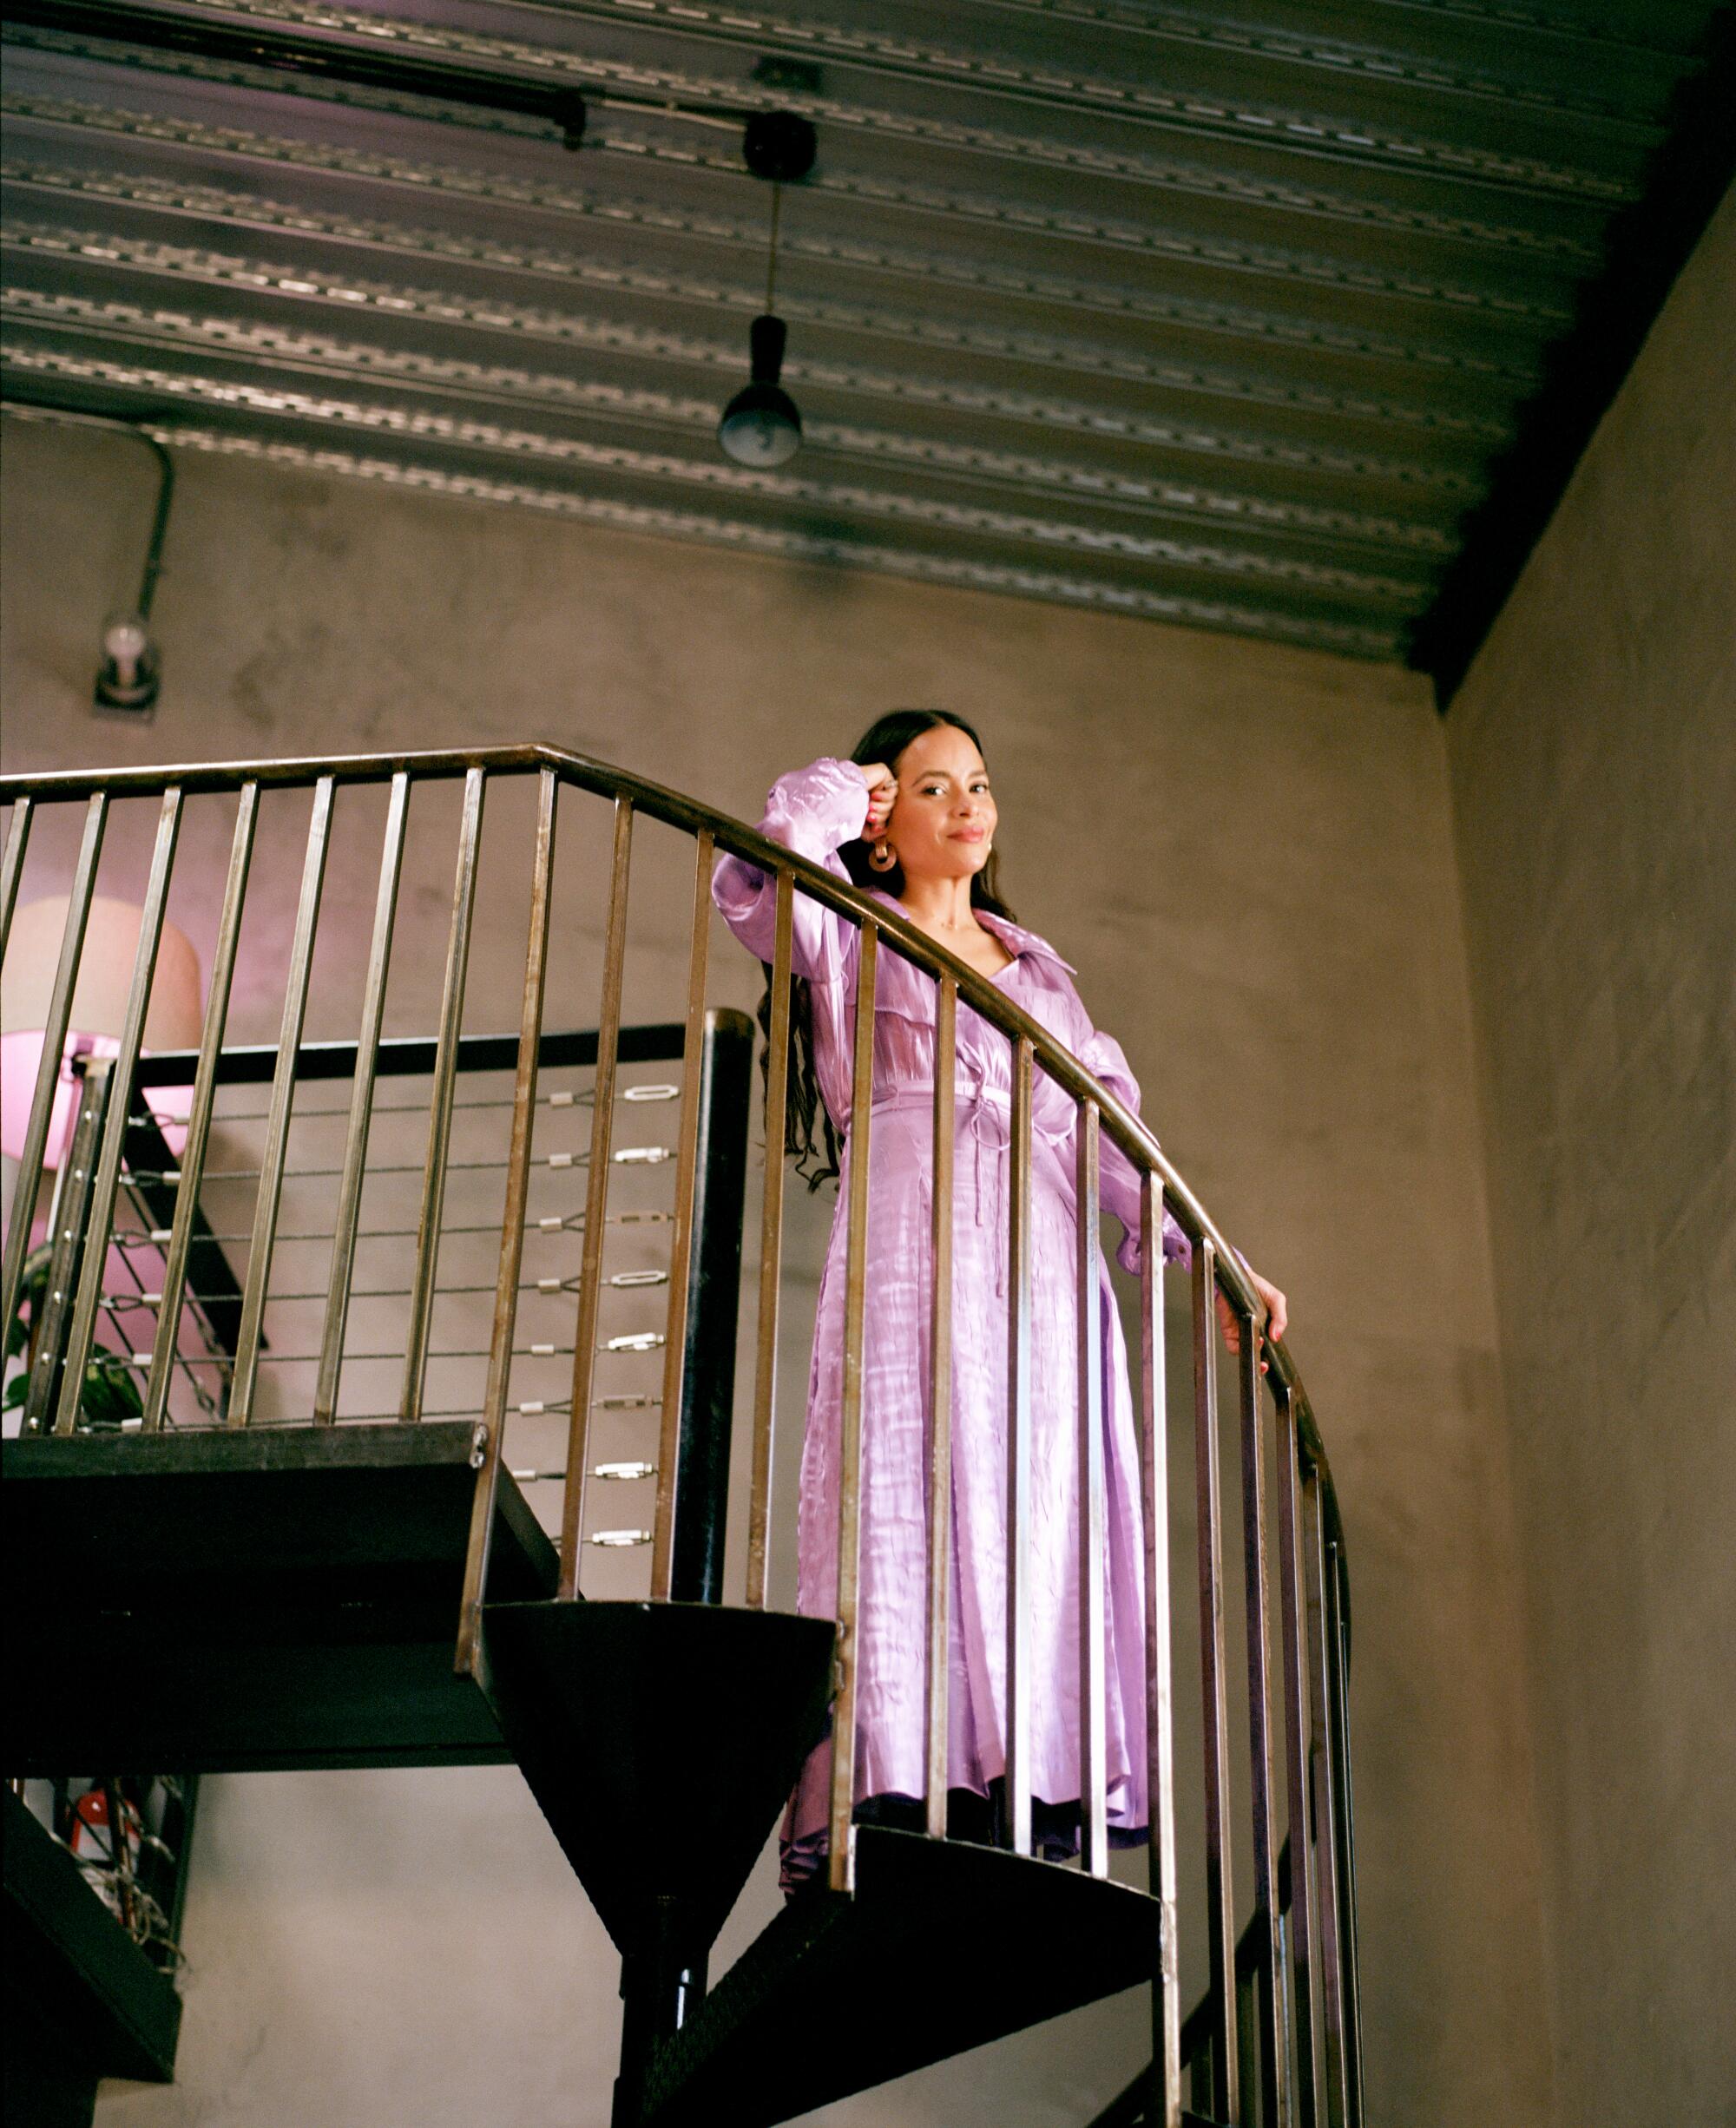 A woman in a pink dress stands at the top of a spiral staircase.